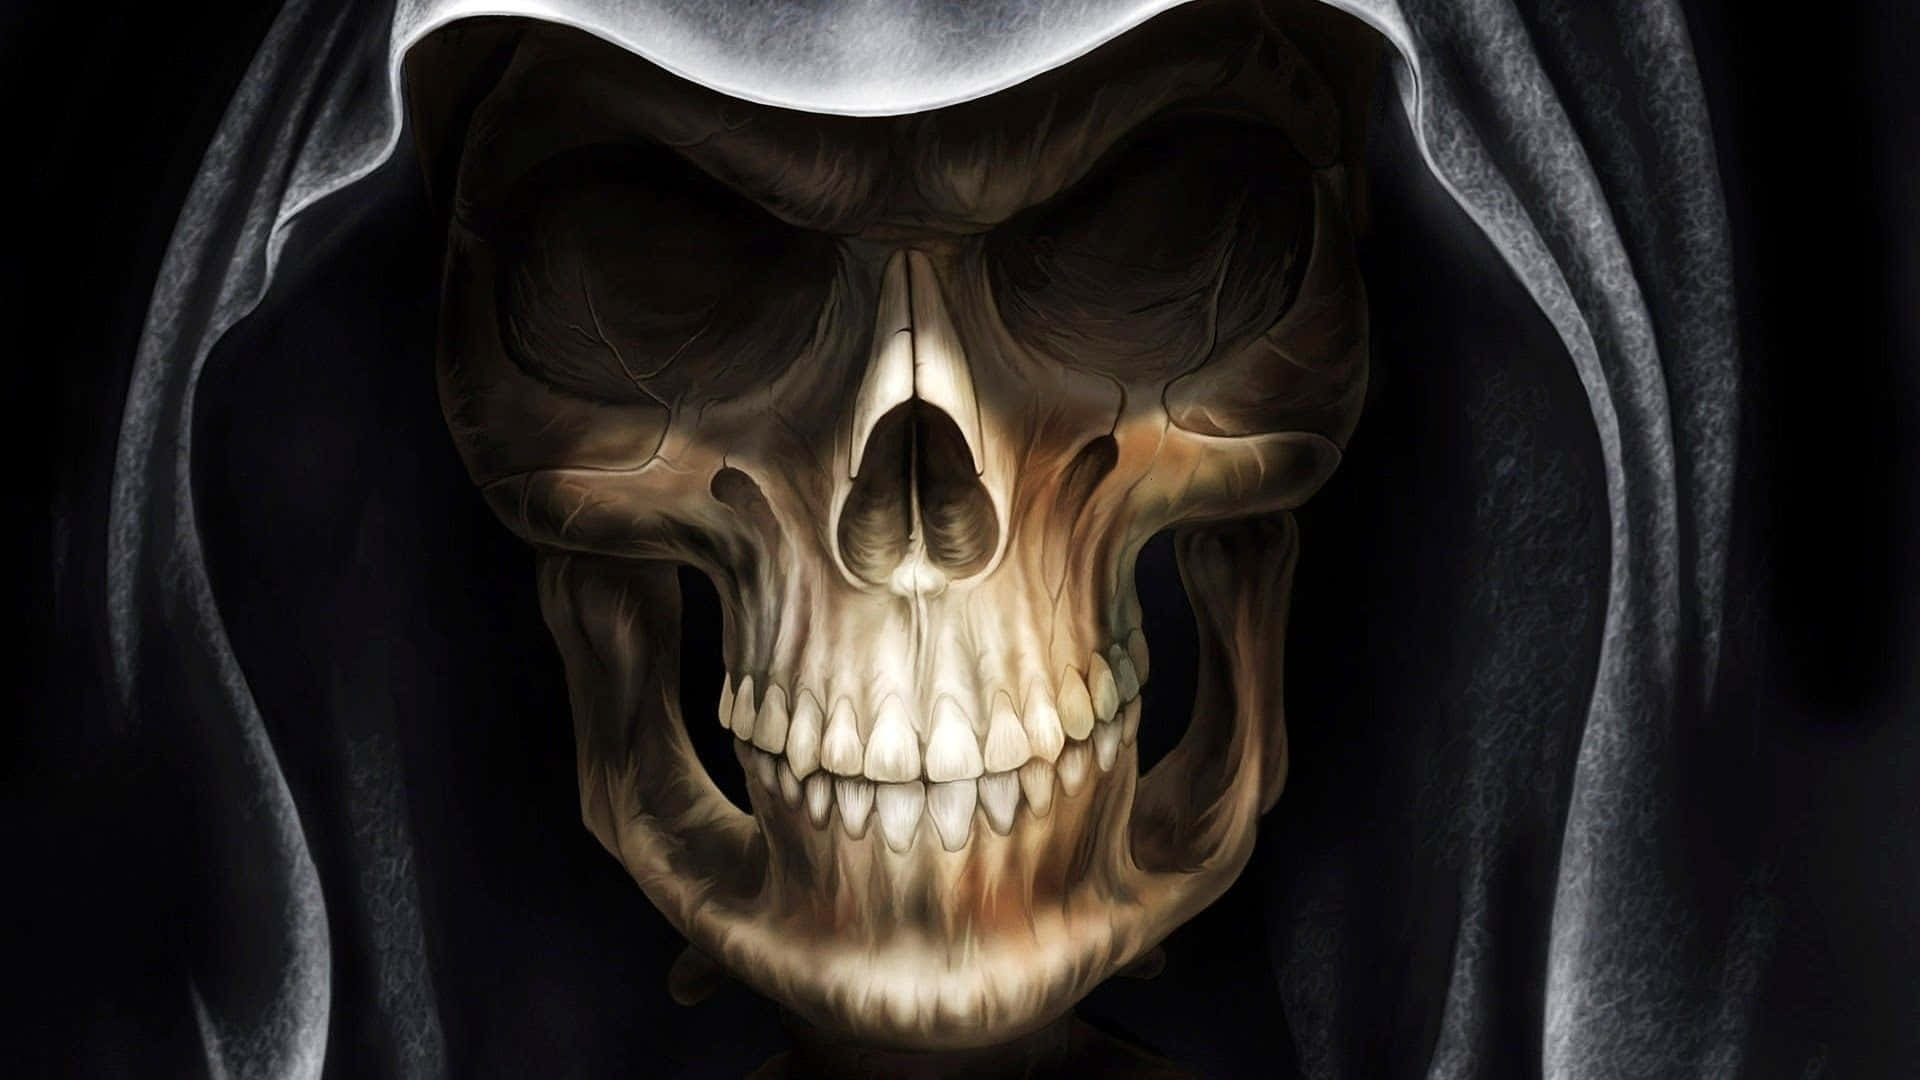 A Creepy Halloween Skeleton Emerging from the Shadows Wallpaper